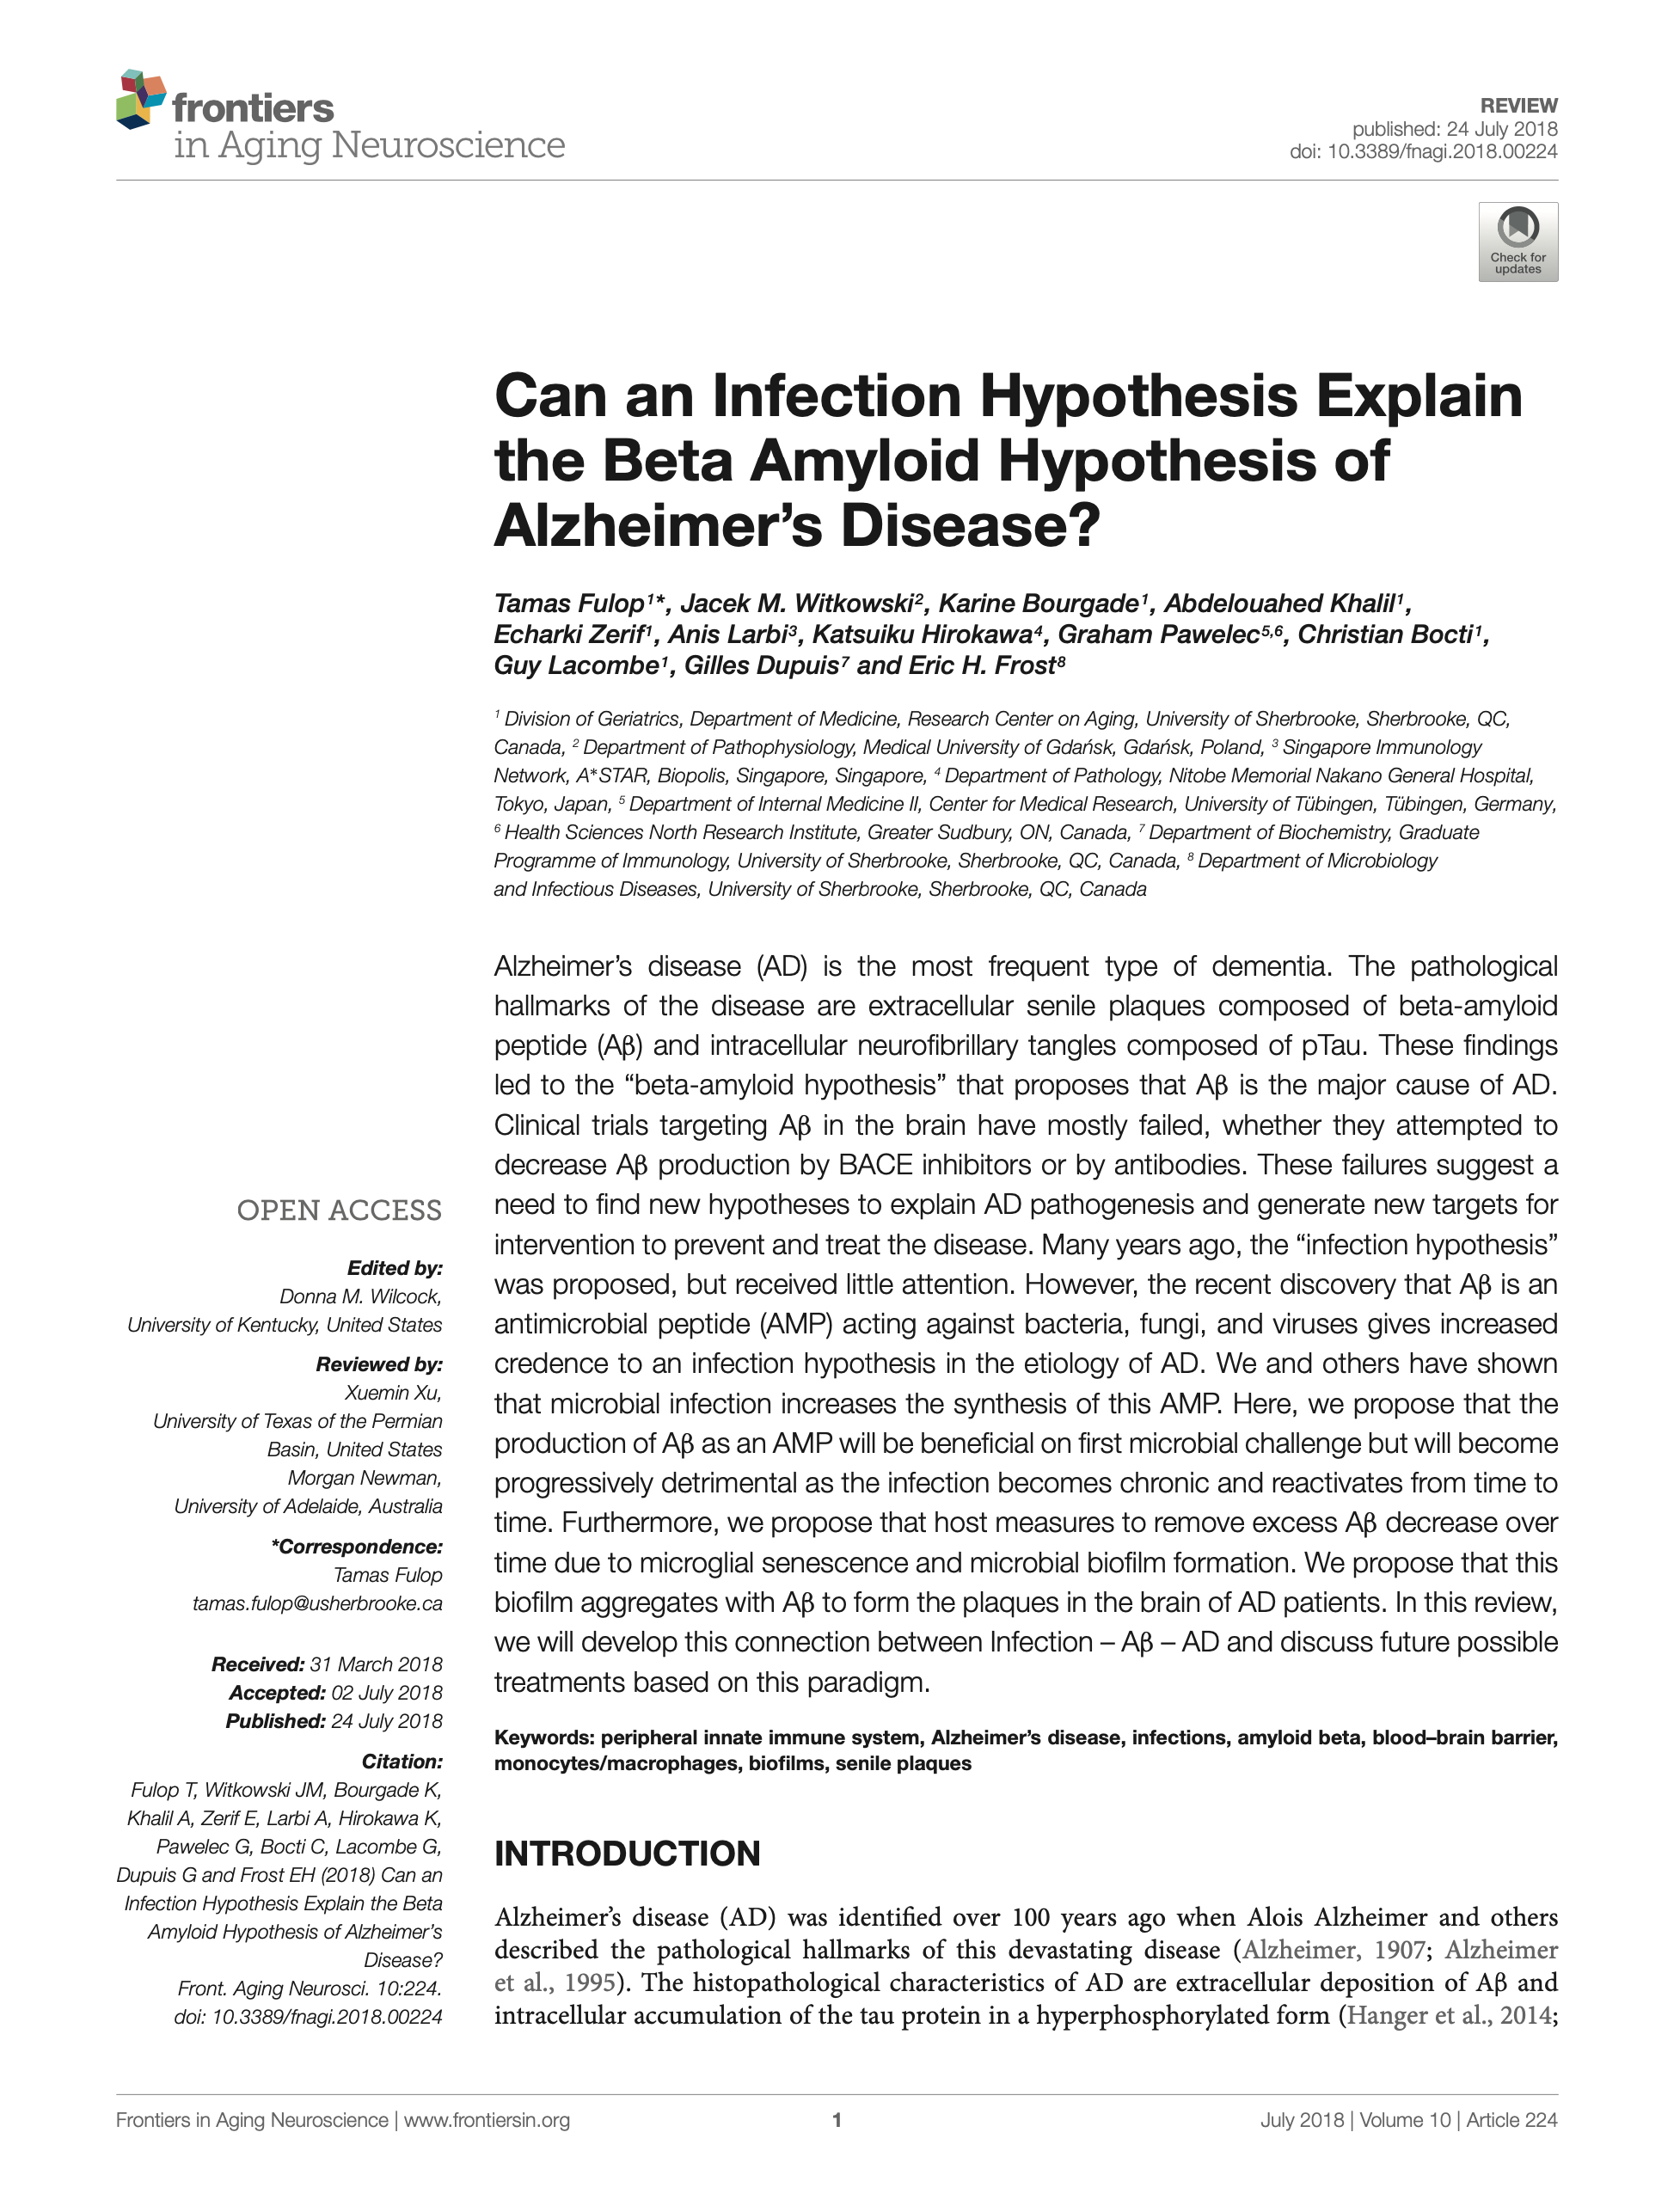 Can an Infection Hypothesis Explain the Beta Amyloid Hypothesis of Alzheimer’s Disease